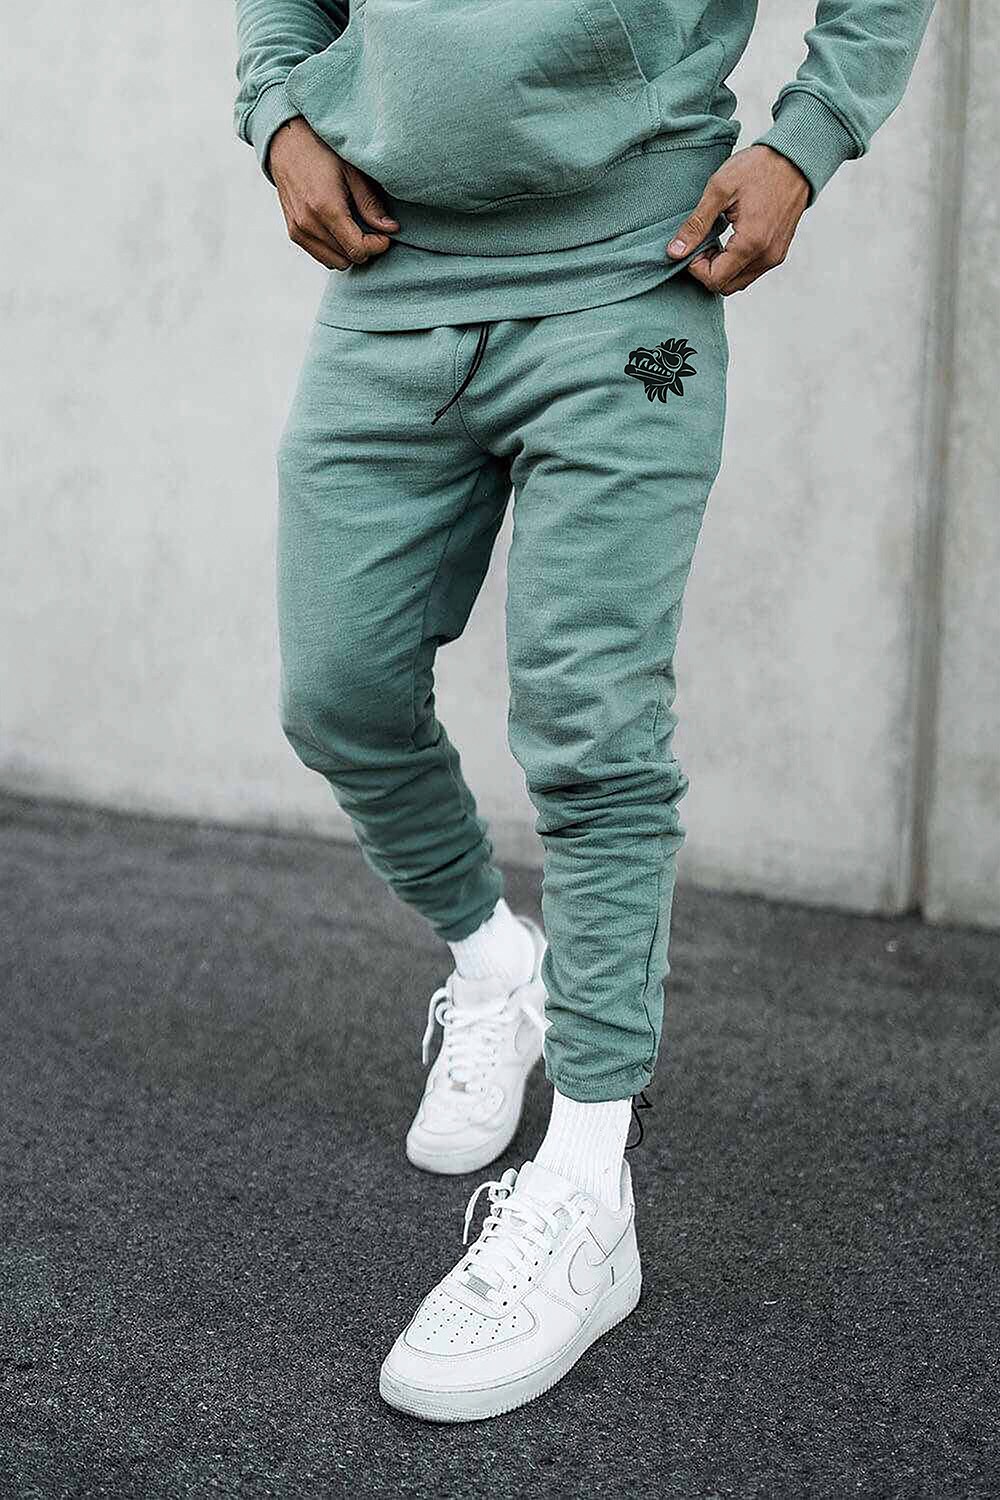 Men's Side Pockets Athleisure Breathable Soft Fitness Sweatpants